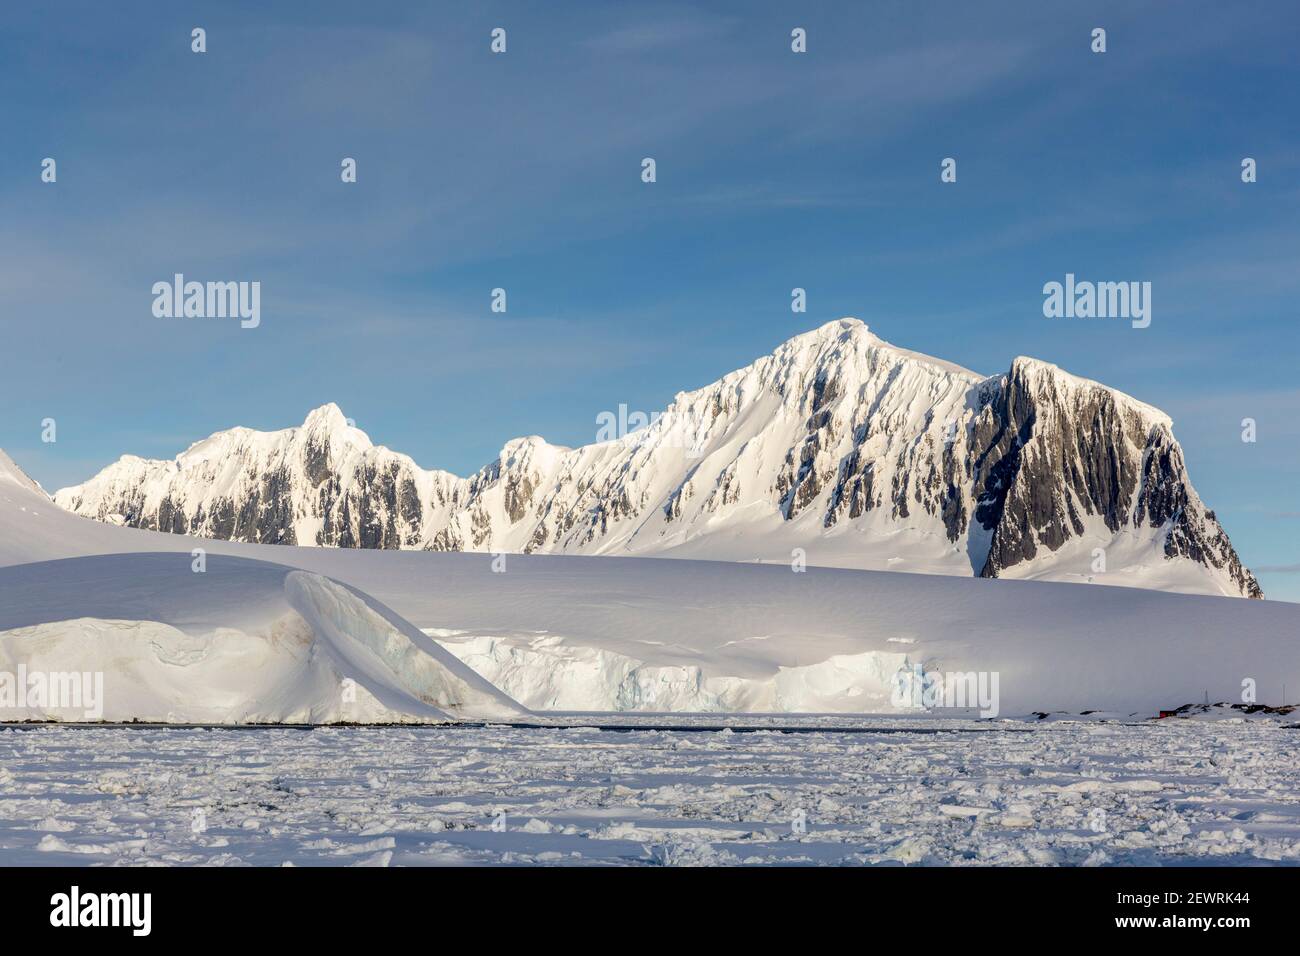 Snow-covered mountains and dense sea ice in Neumayer Channel, Palmer Archipelago, Antarctica, Polar Regions Stock Photo